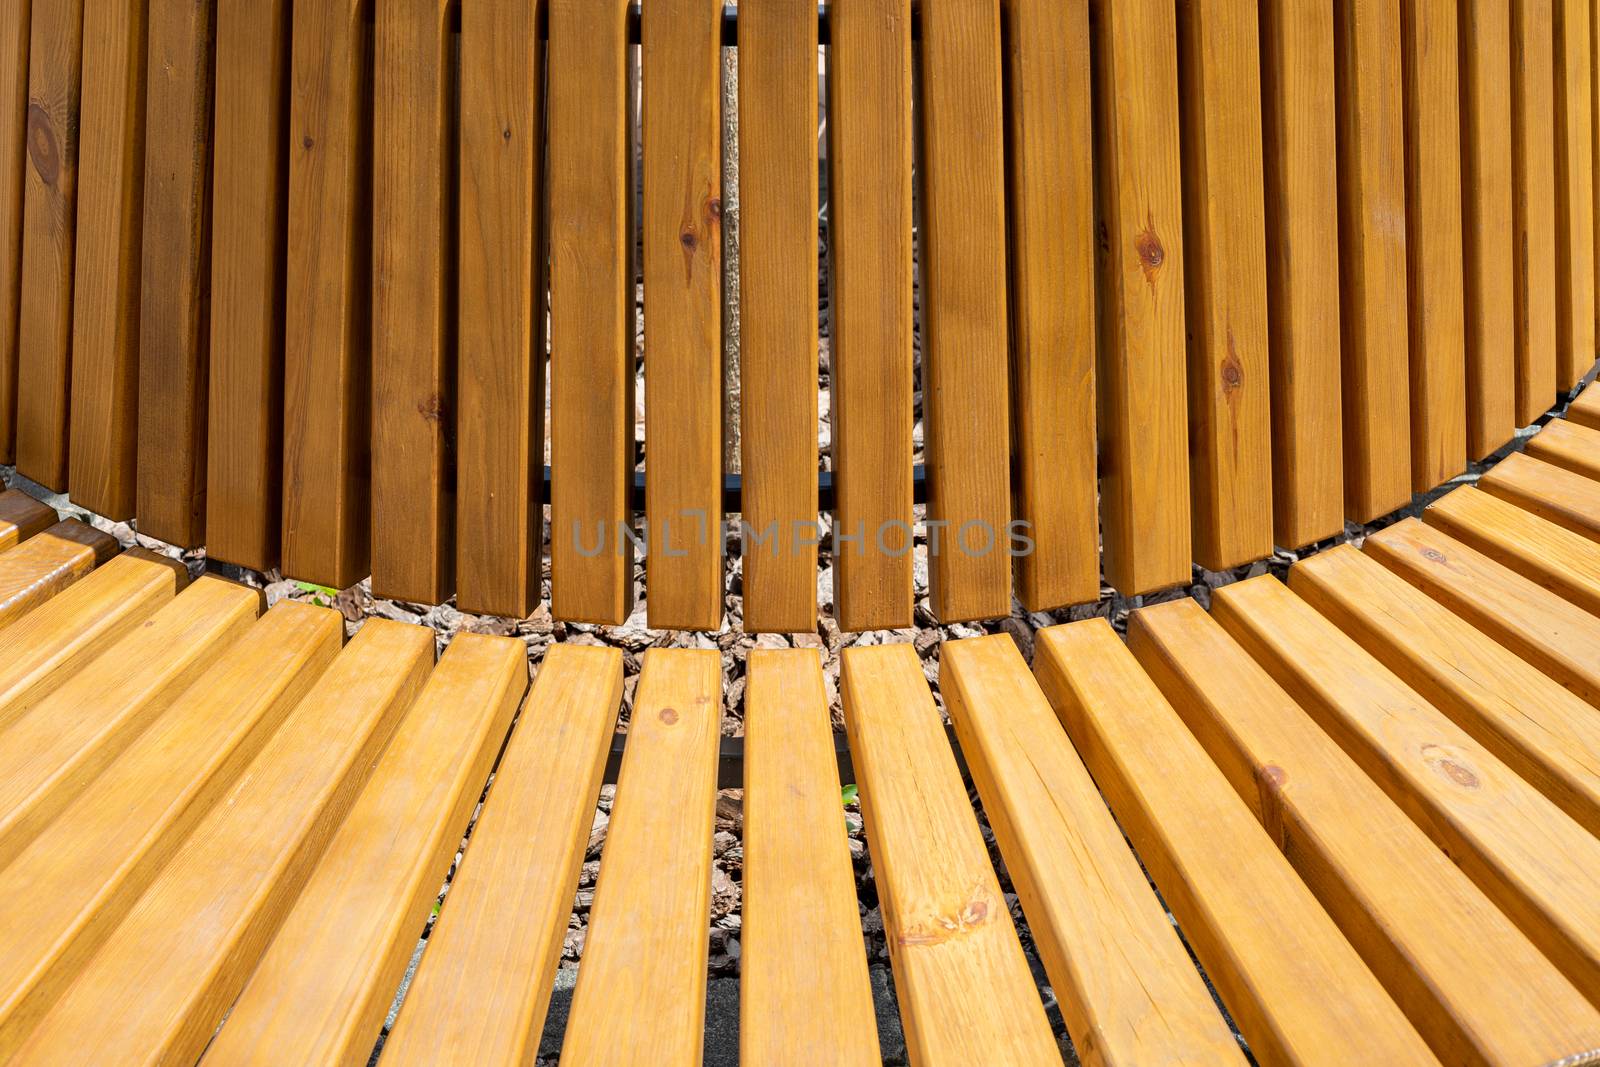 Bench with wooden boards close up. Background from wooden boards arranged in a semicircle. Wooden bench round